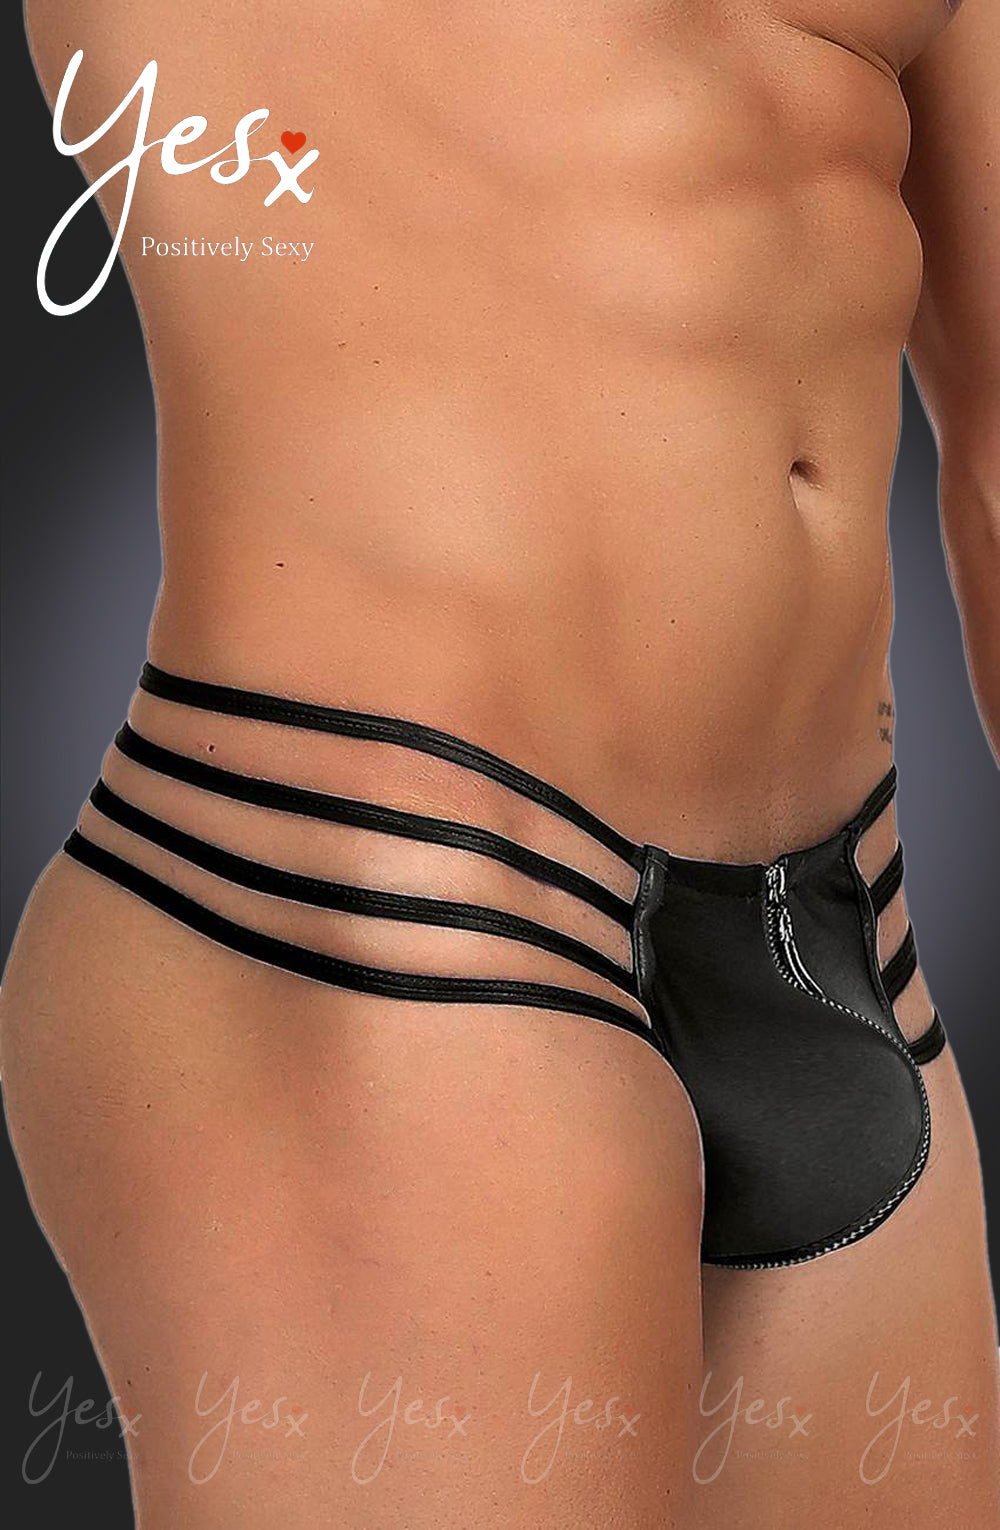 Vibrators, Sex Toy Kits and Sex Toys at Cloud9Adults - YesX YX971 Men's Thong Black - Buy Sex Toys Online